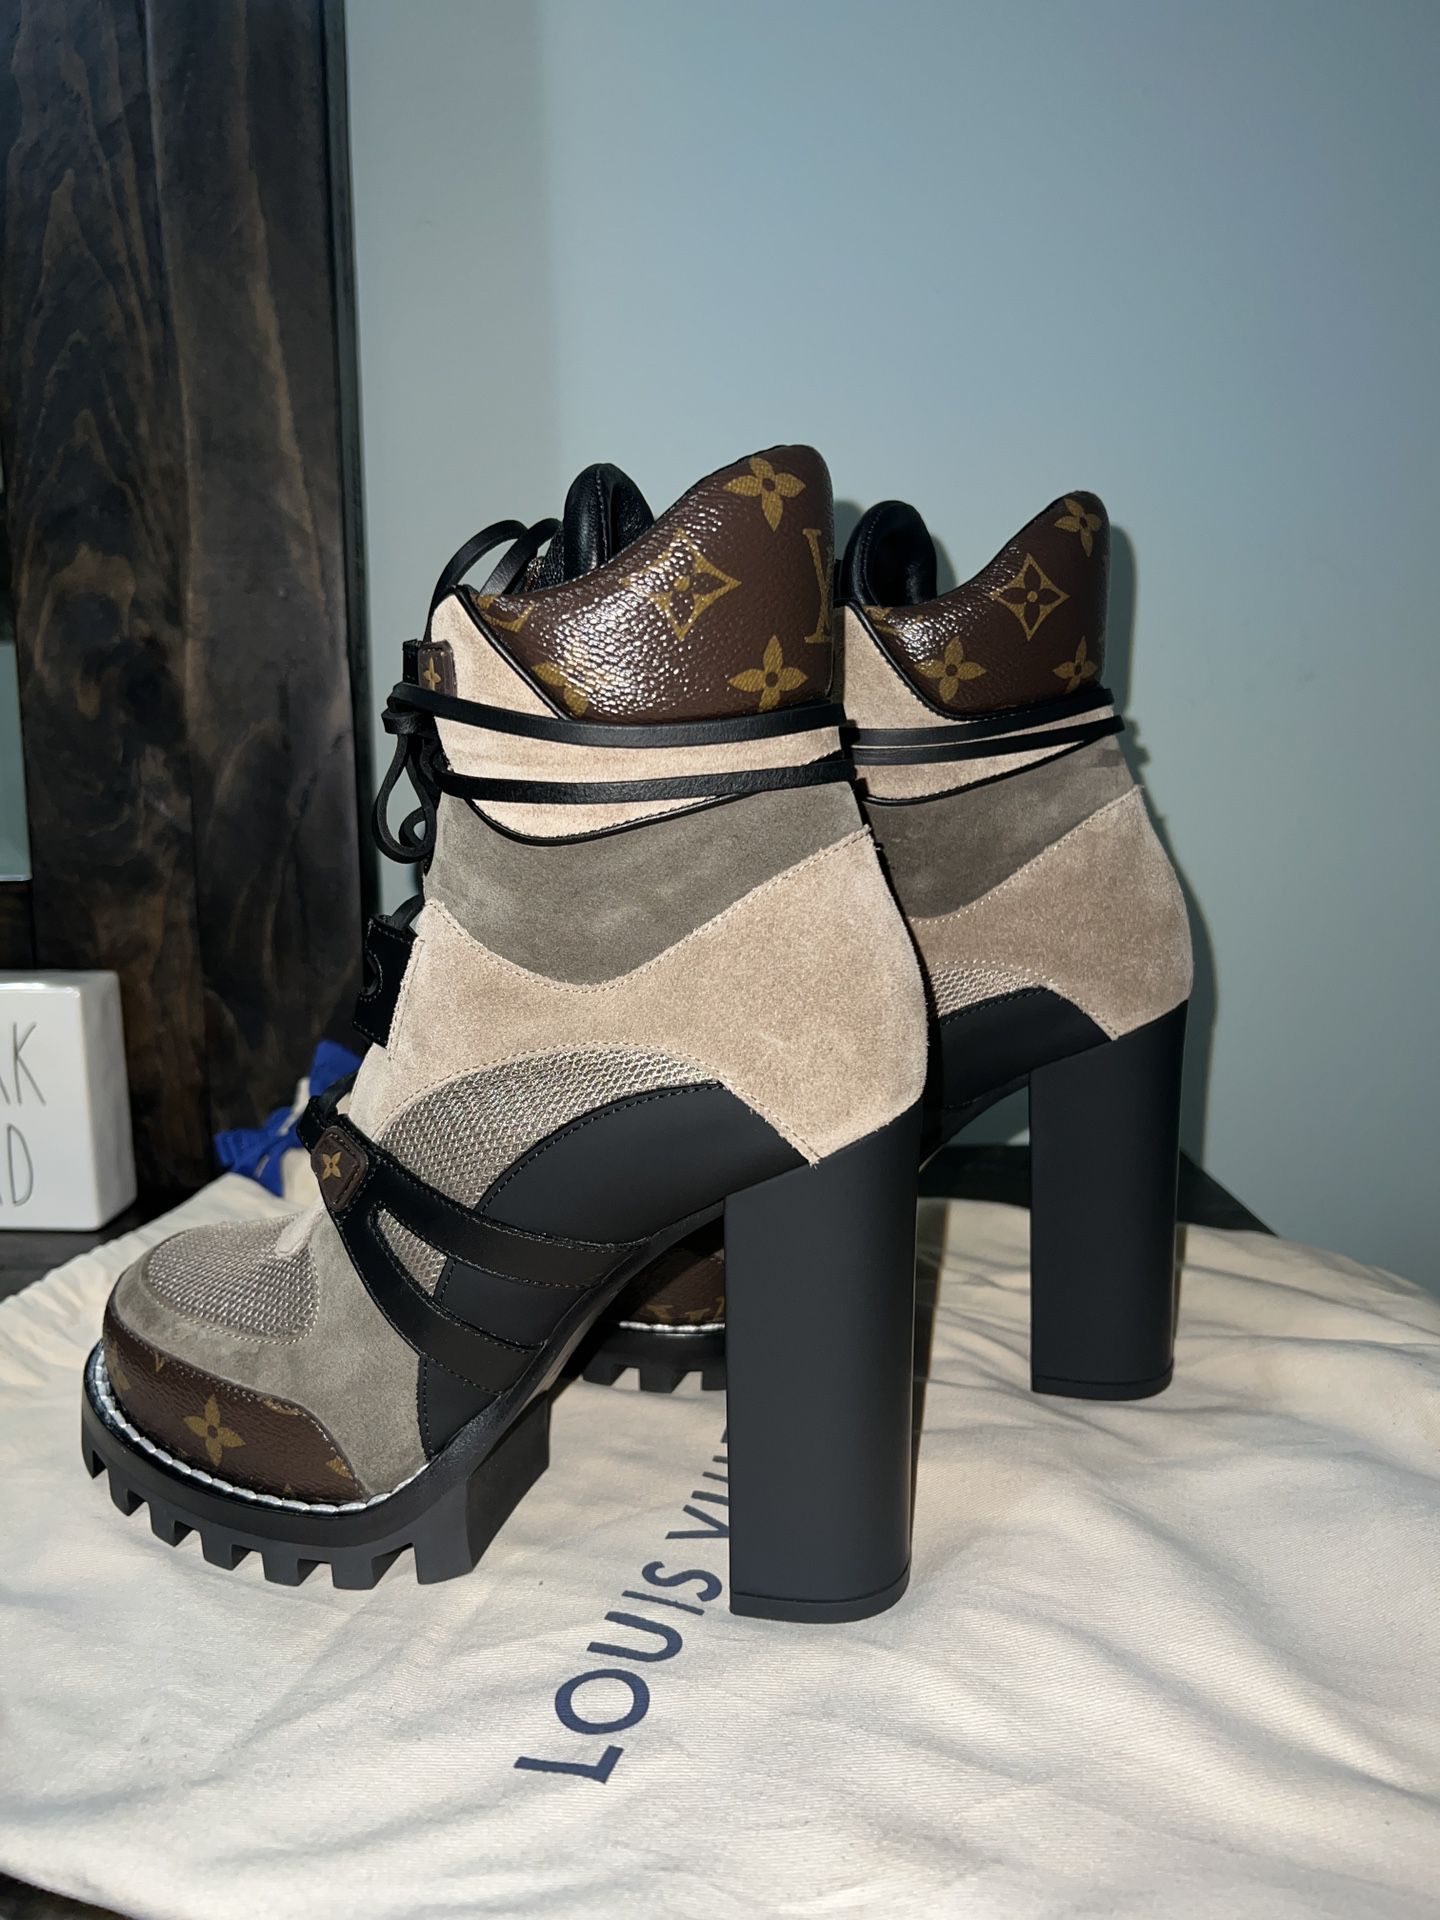 Louis Vuitton Silhouette Boots for Sale in Austin, TX - OfferUp